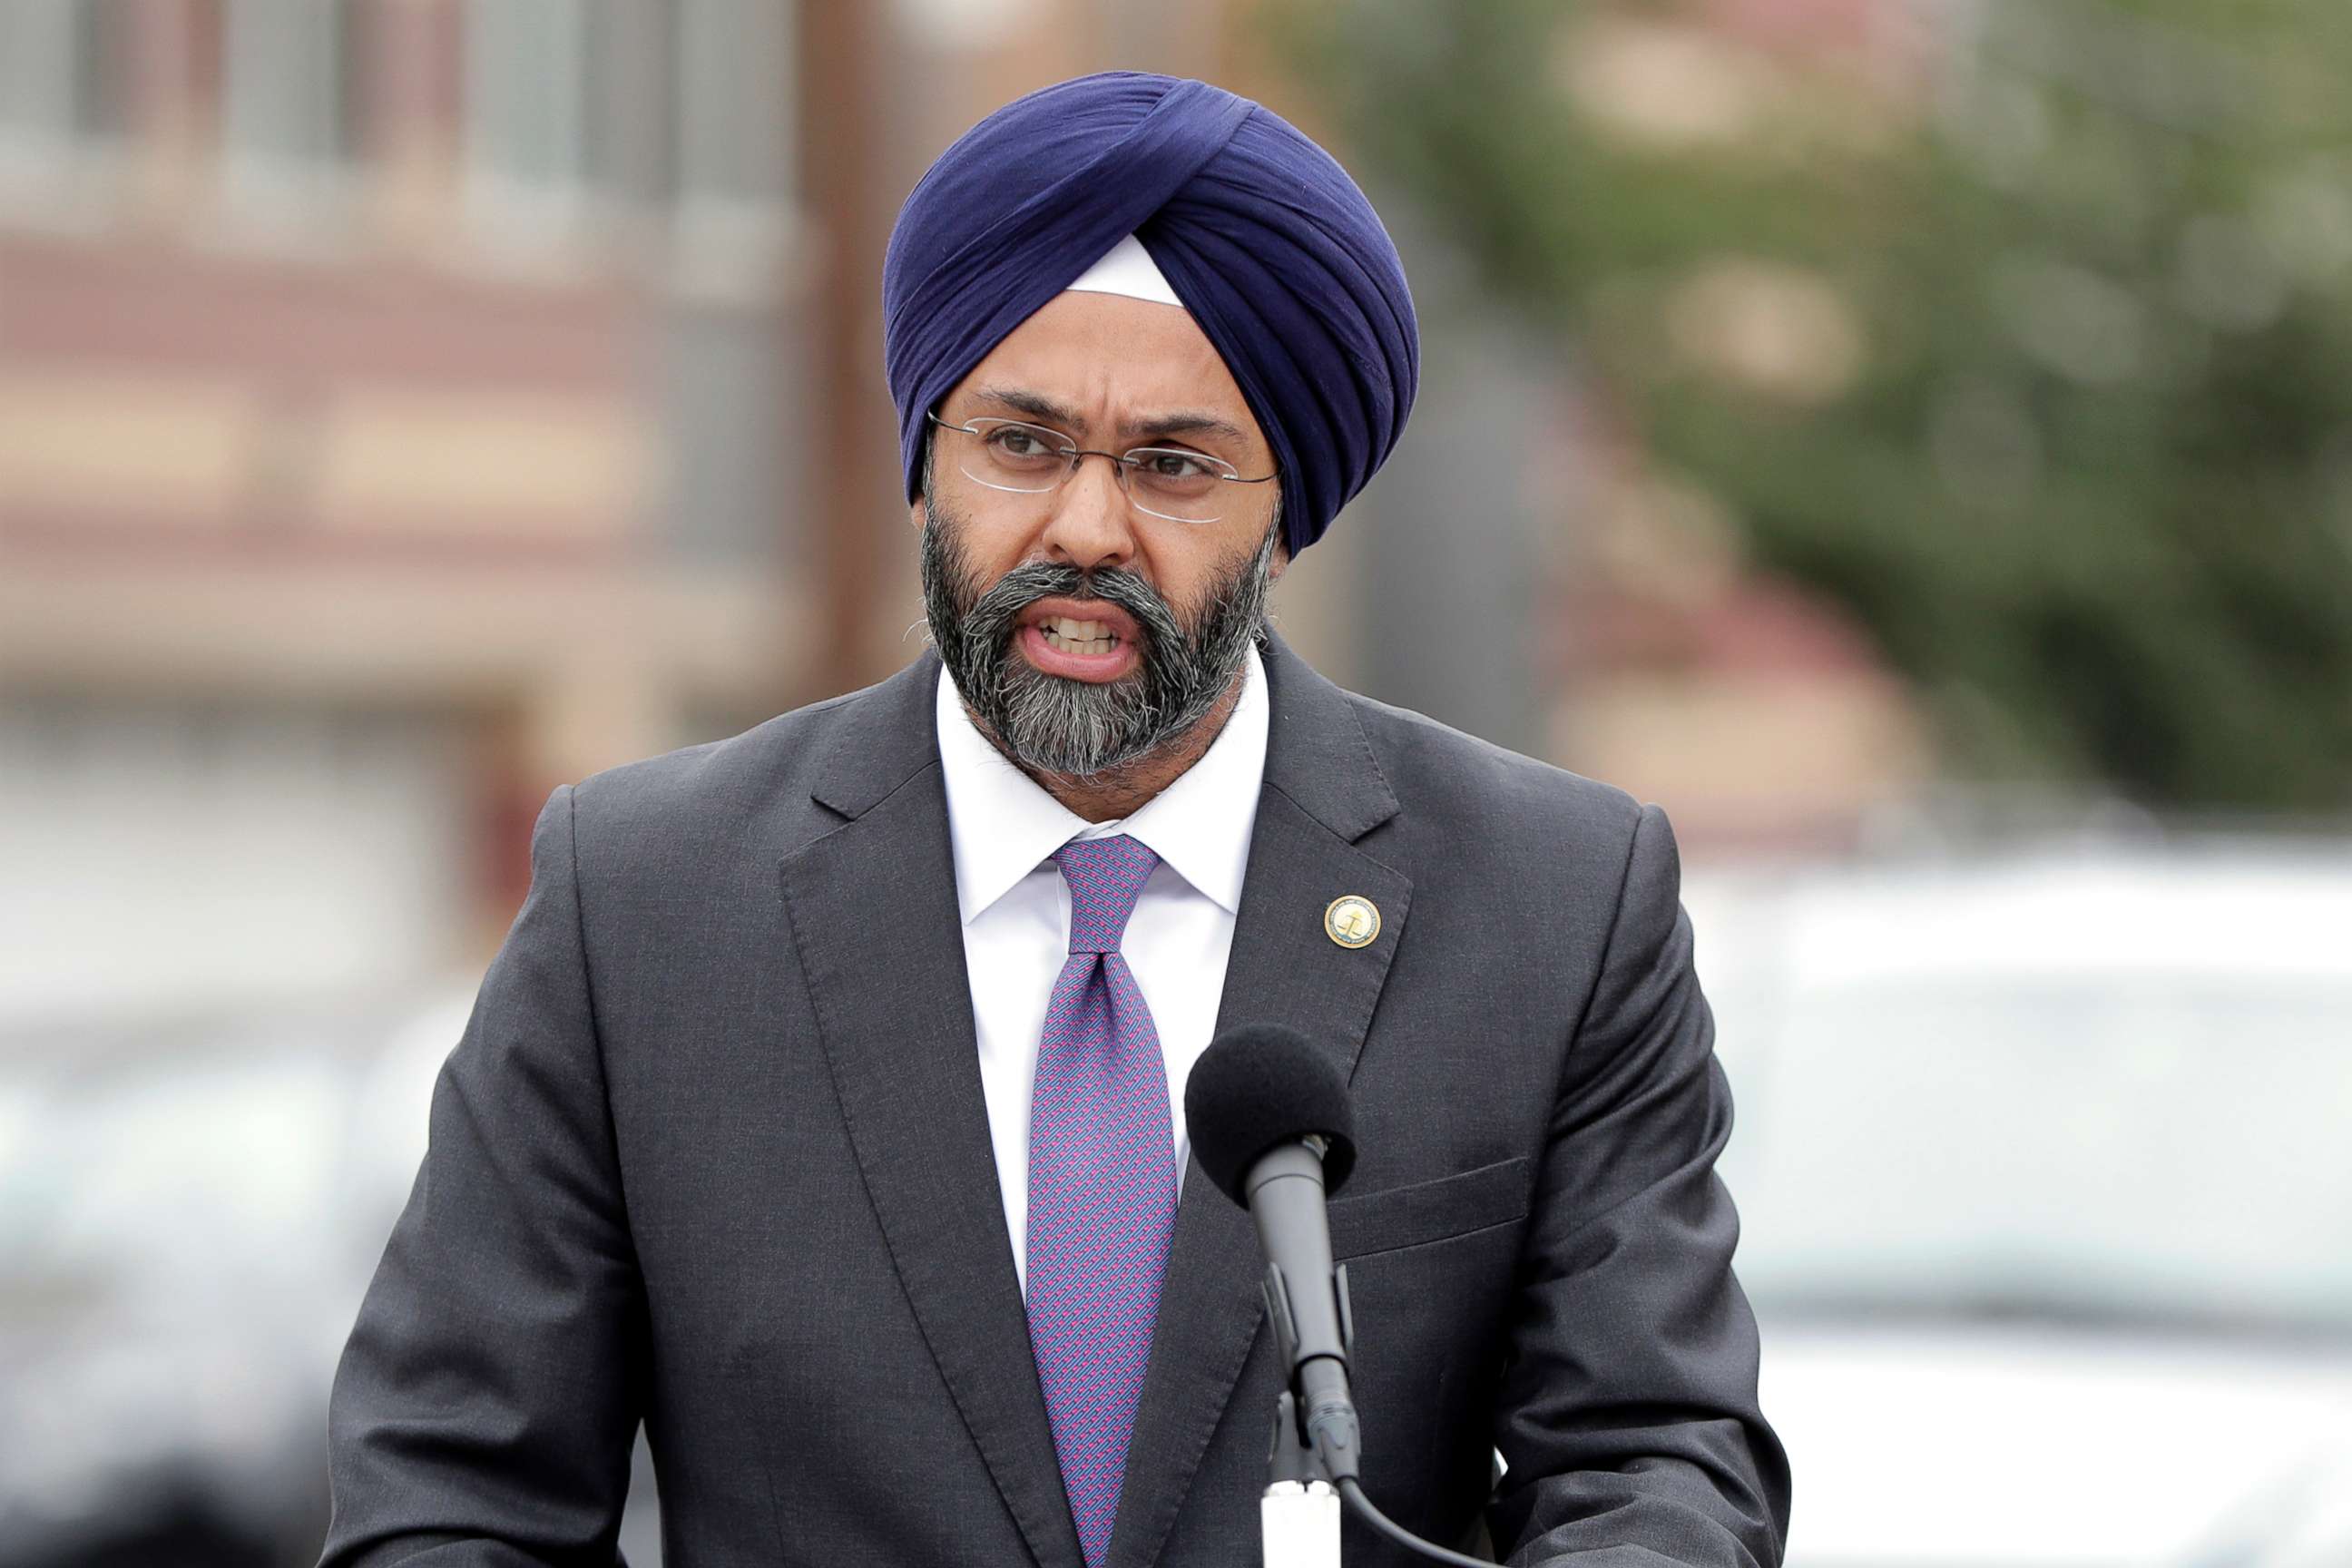 PHOTO: New Jersey Attorney General Gurbir Grewal speaks during a news conference in Newark, N.J., Aug. 1, 2018.